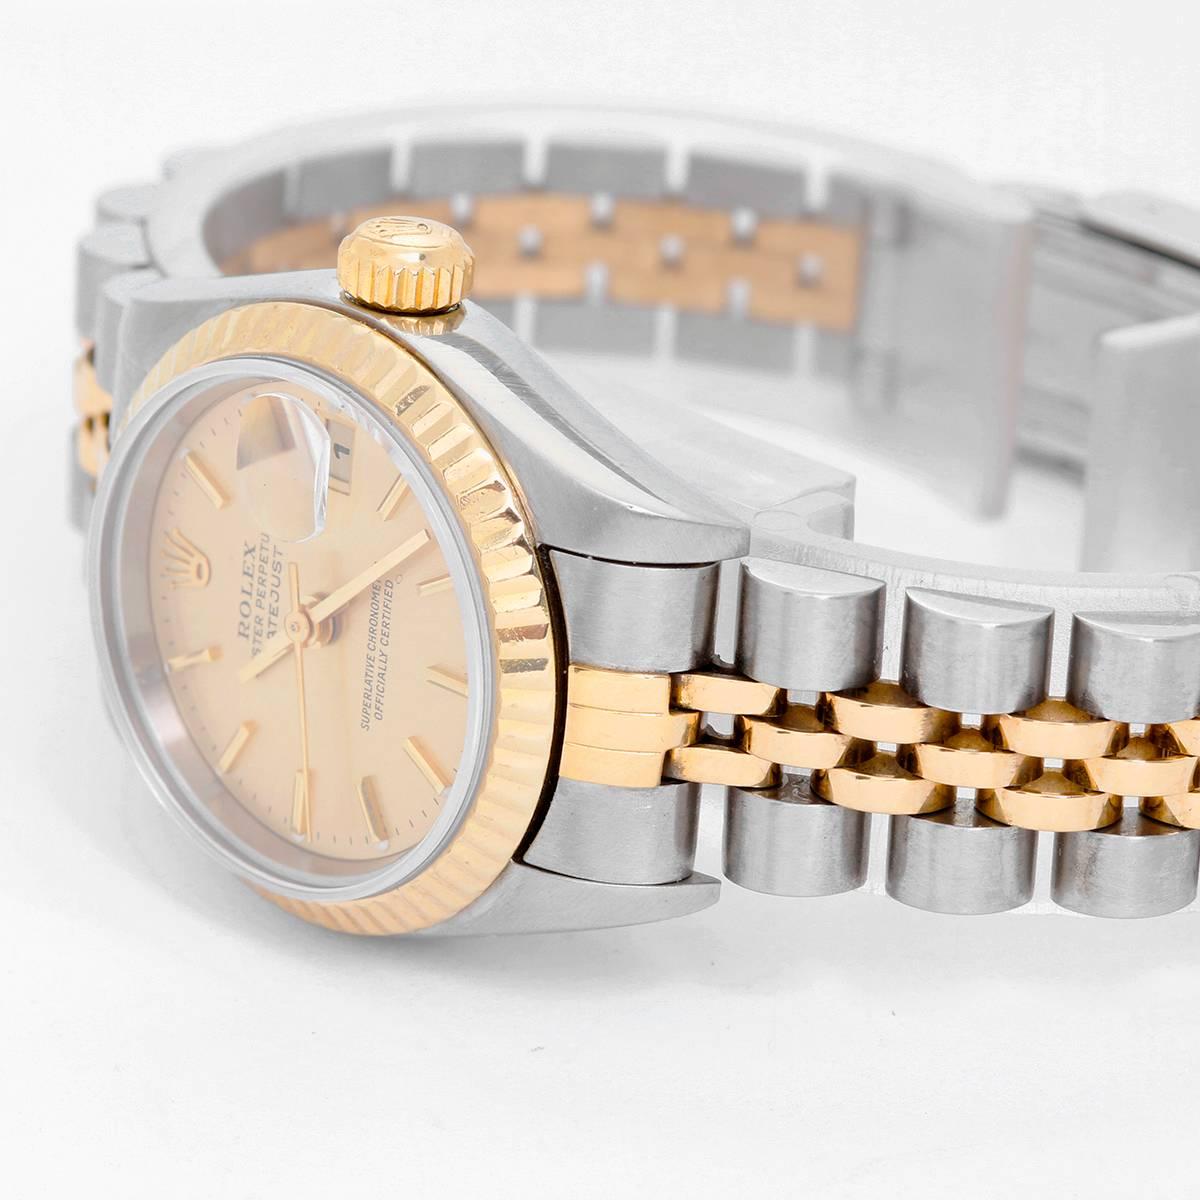 Rolex  2-Tone Datejust Steel & Gold Ladies Watch 69173 -  Automatic winding, 29 jewels, Quickset date, sapphire crystal. Stainless steel case with 18k yellow gold fluted bezel  (26mm diameter). Champagne dial with gold stick markers. Stainless steel